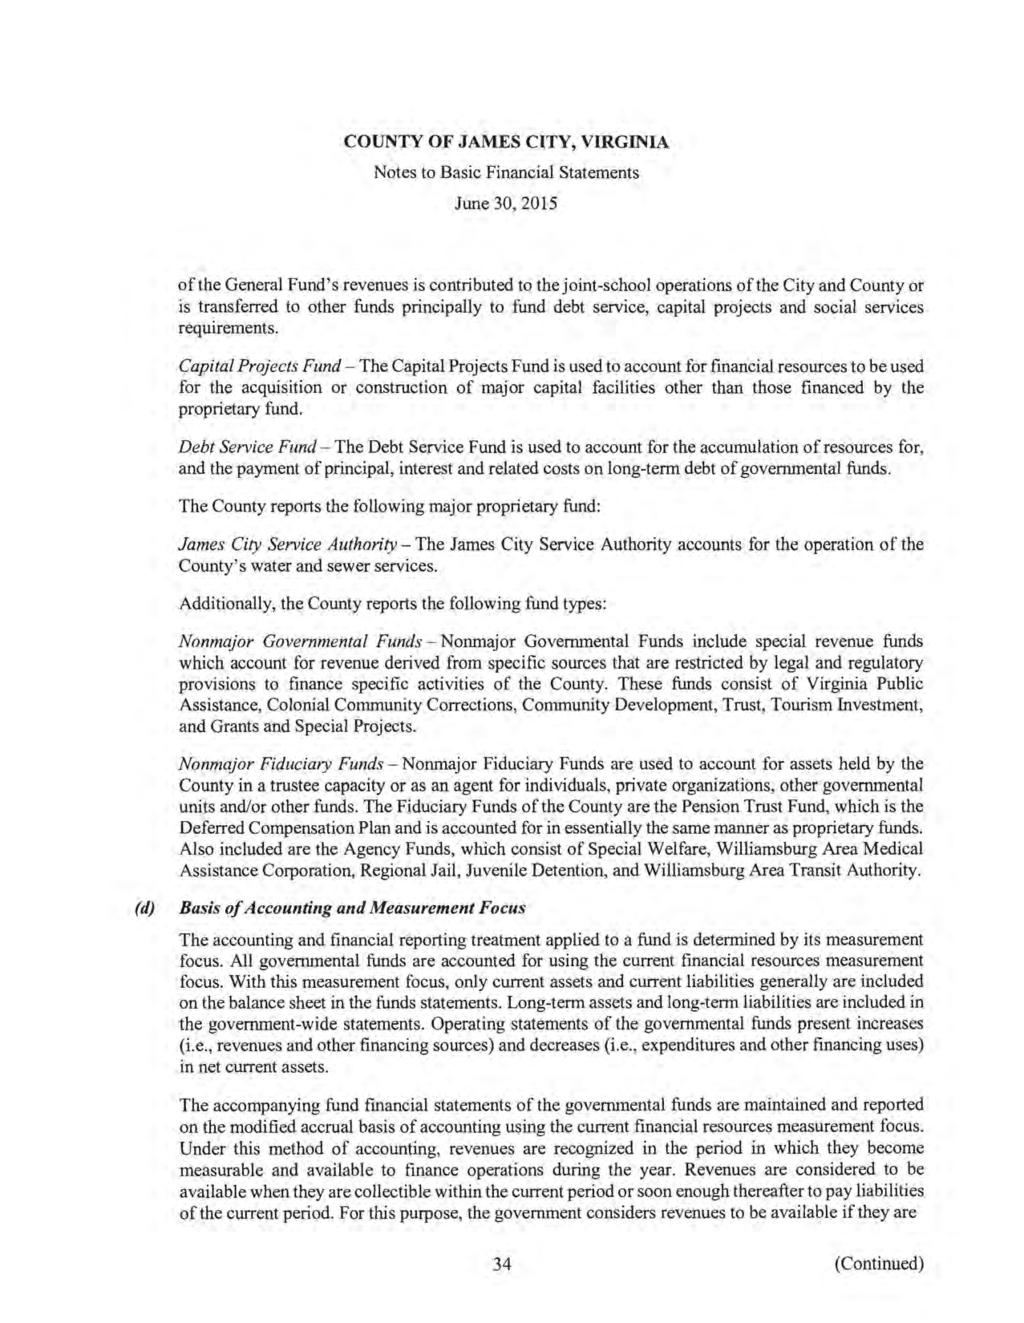 COUNTY OF JAMES CITY, VIRGINIA Notes to Basic Financial Statements June 30, 2015 of the General Fund's revenues is contributed to the joint-school operations of the City and County or is transferred